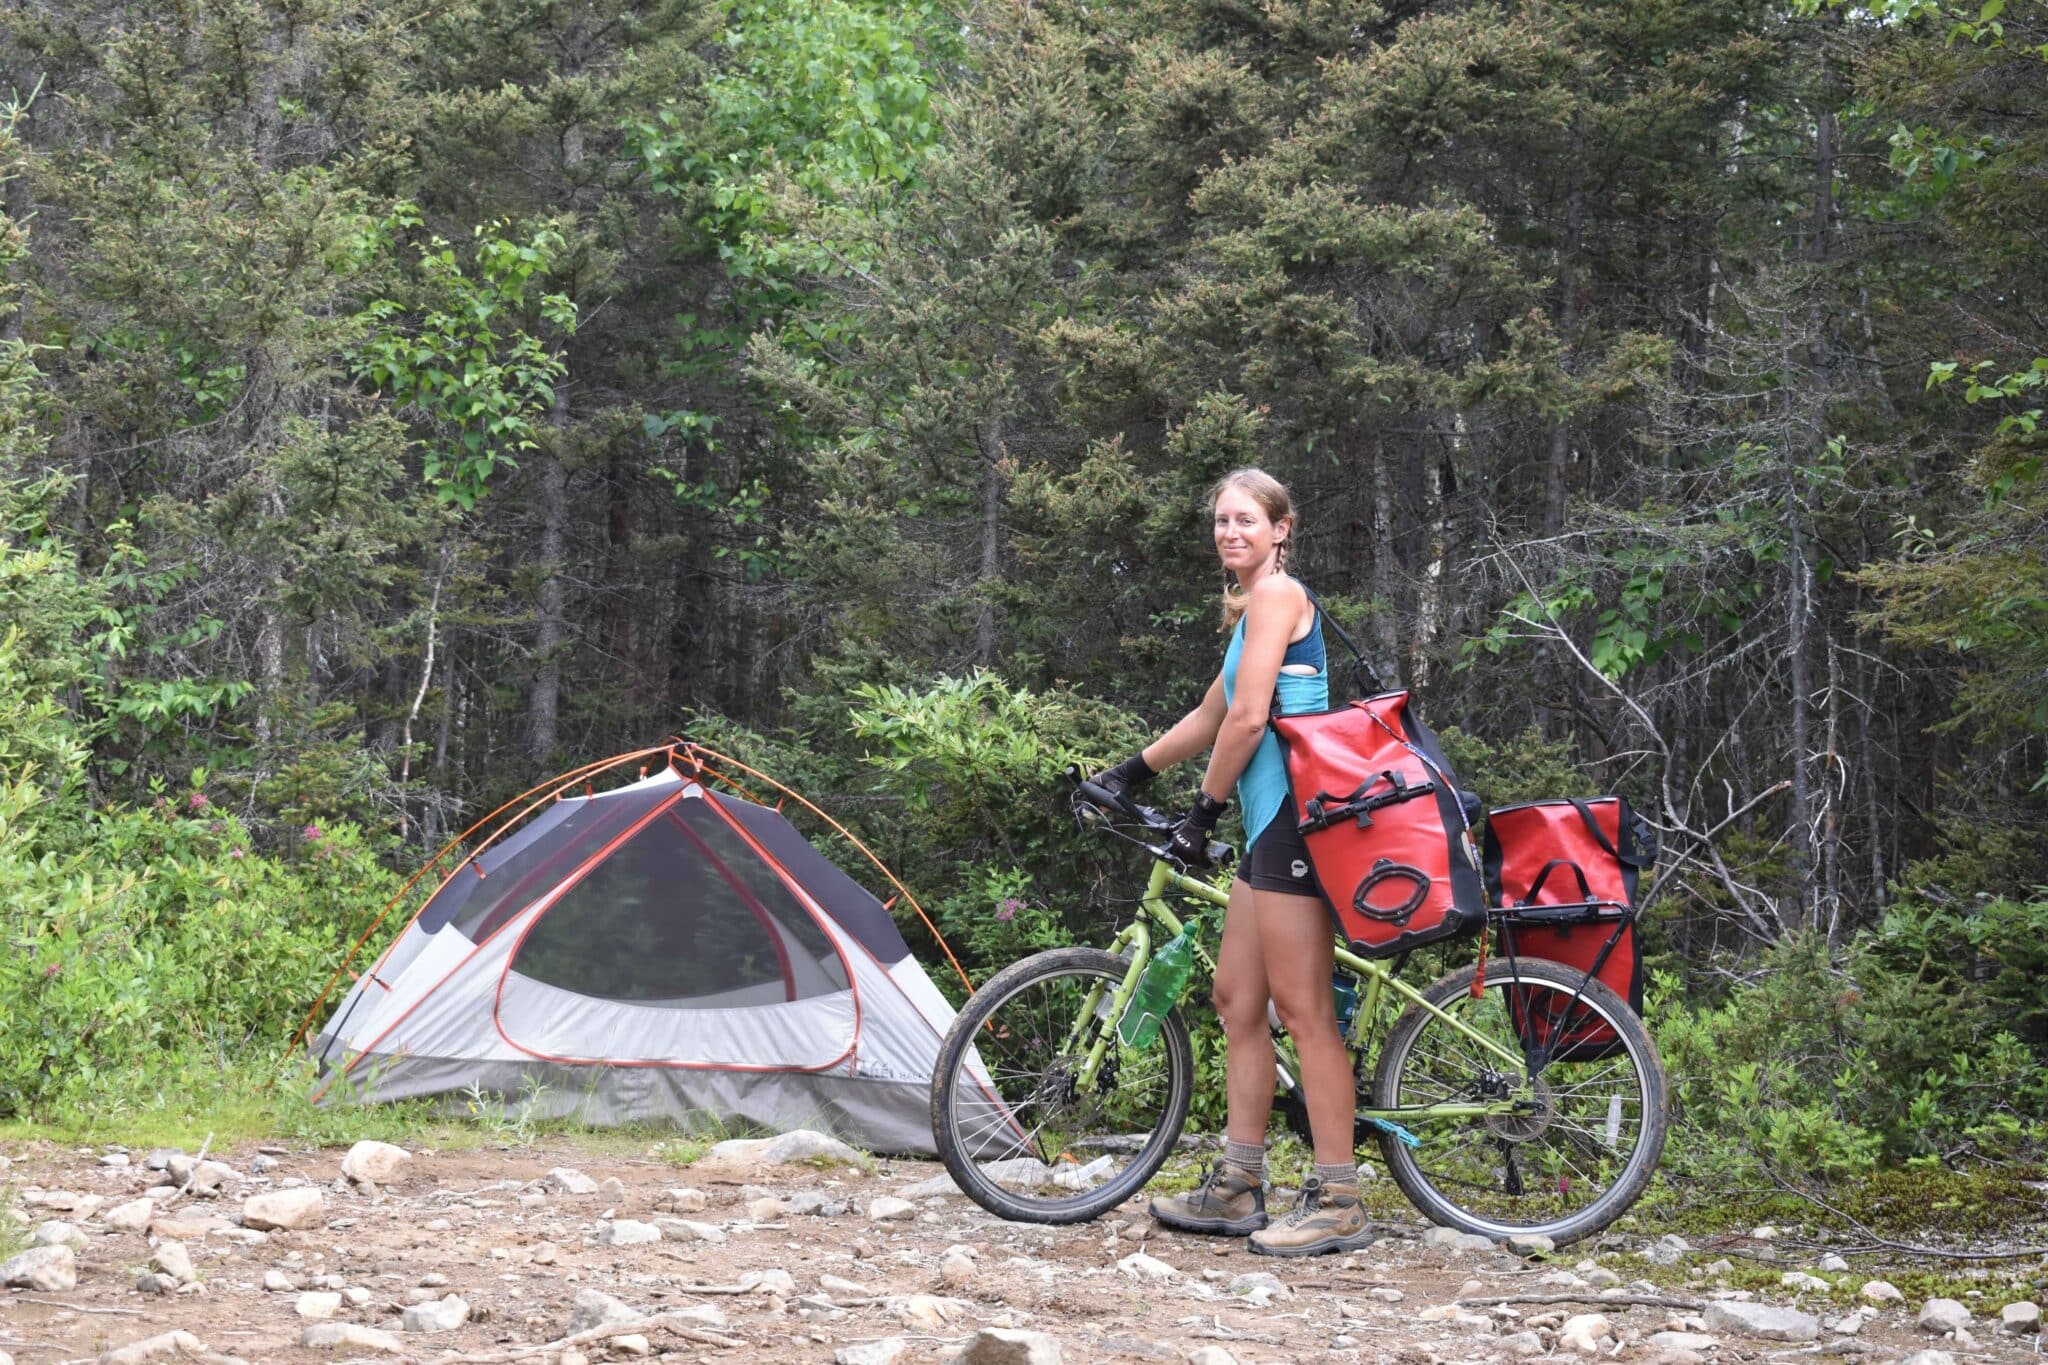 A bikepacker next to a tent in the forest.